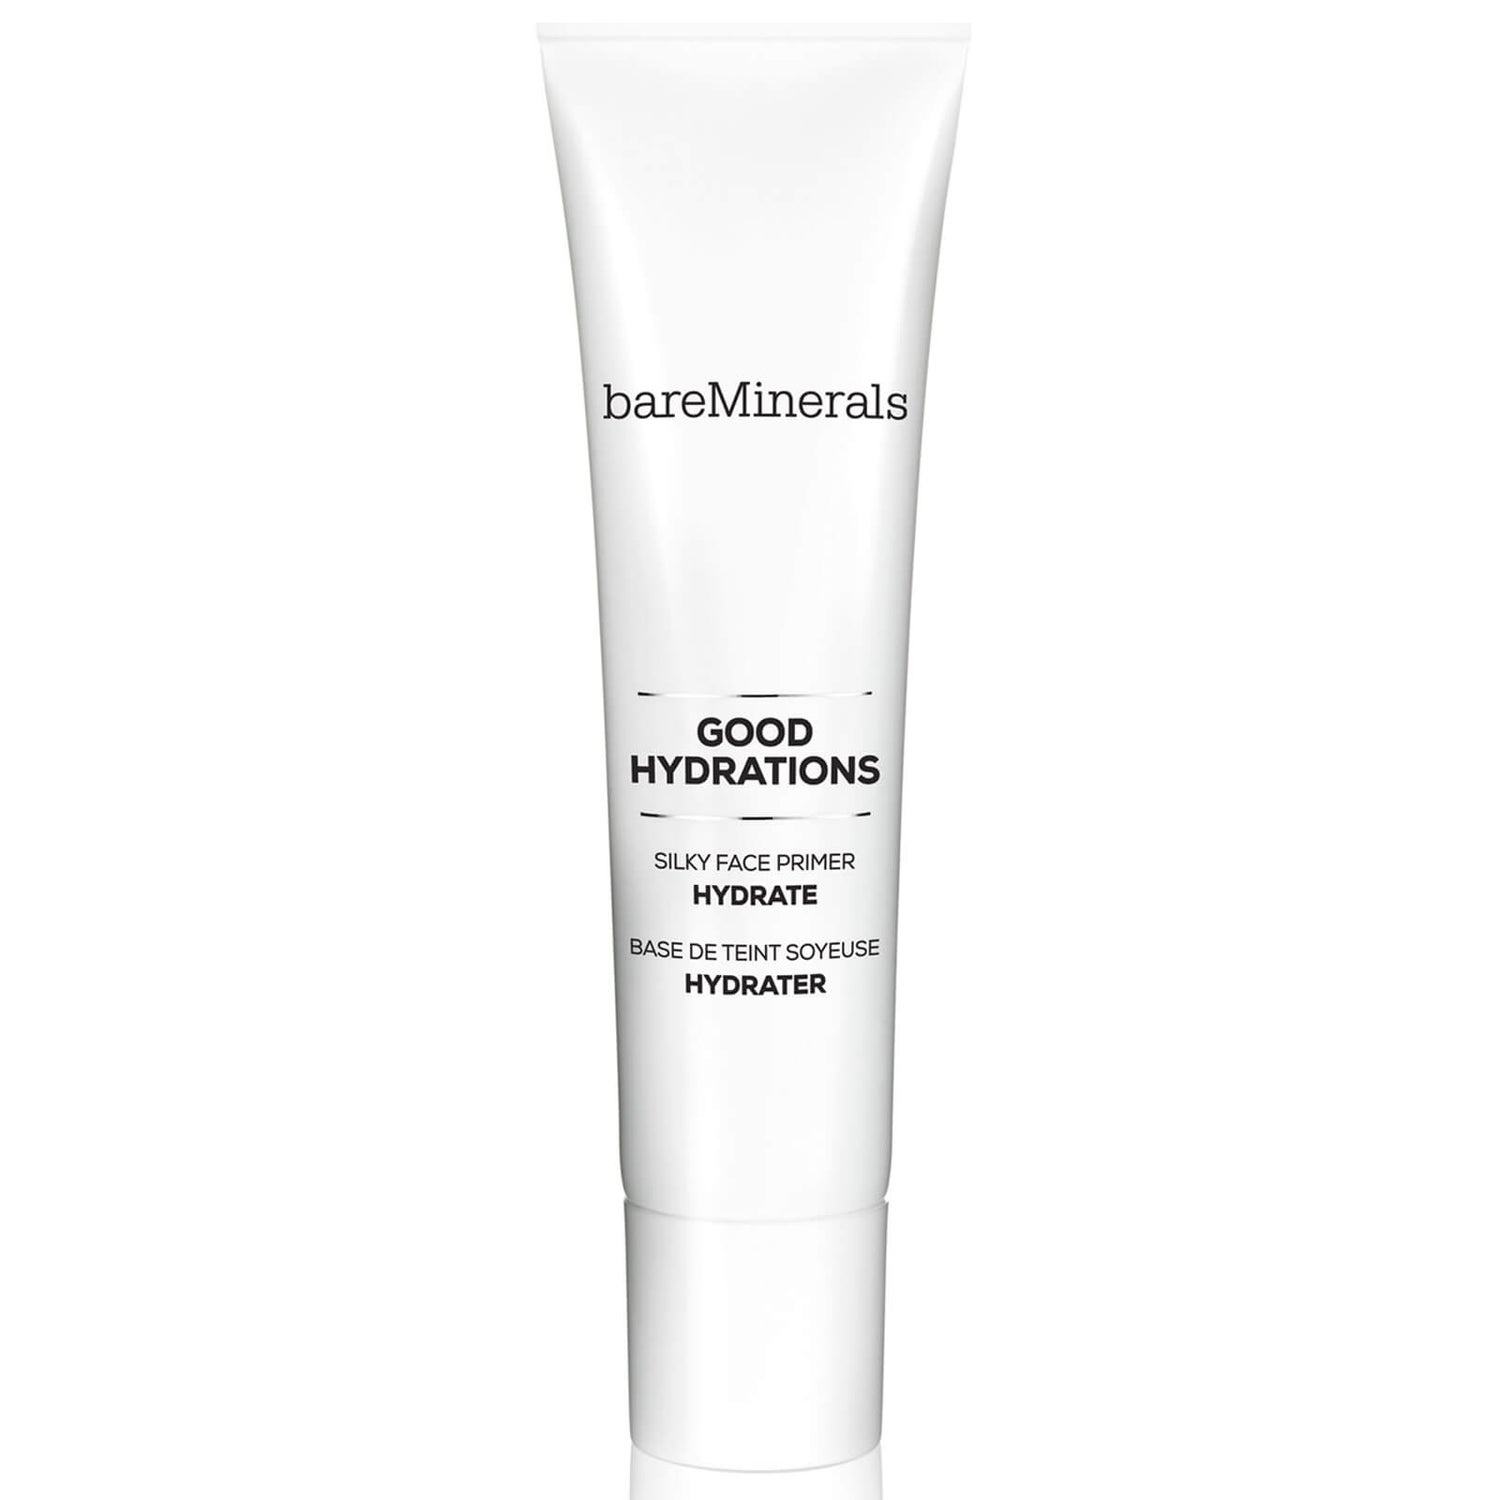 bareMinerals Good Hydrations Silky Face Primer - Hydrate 30 ml